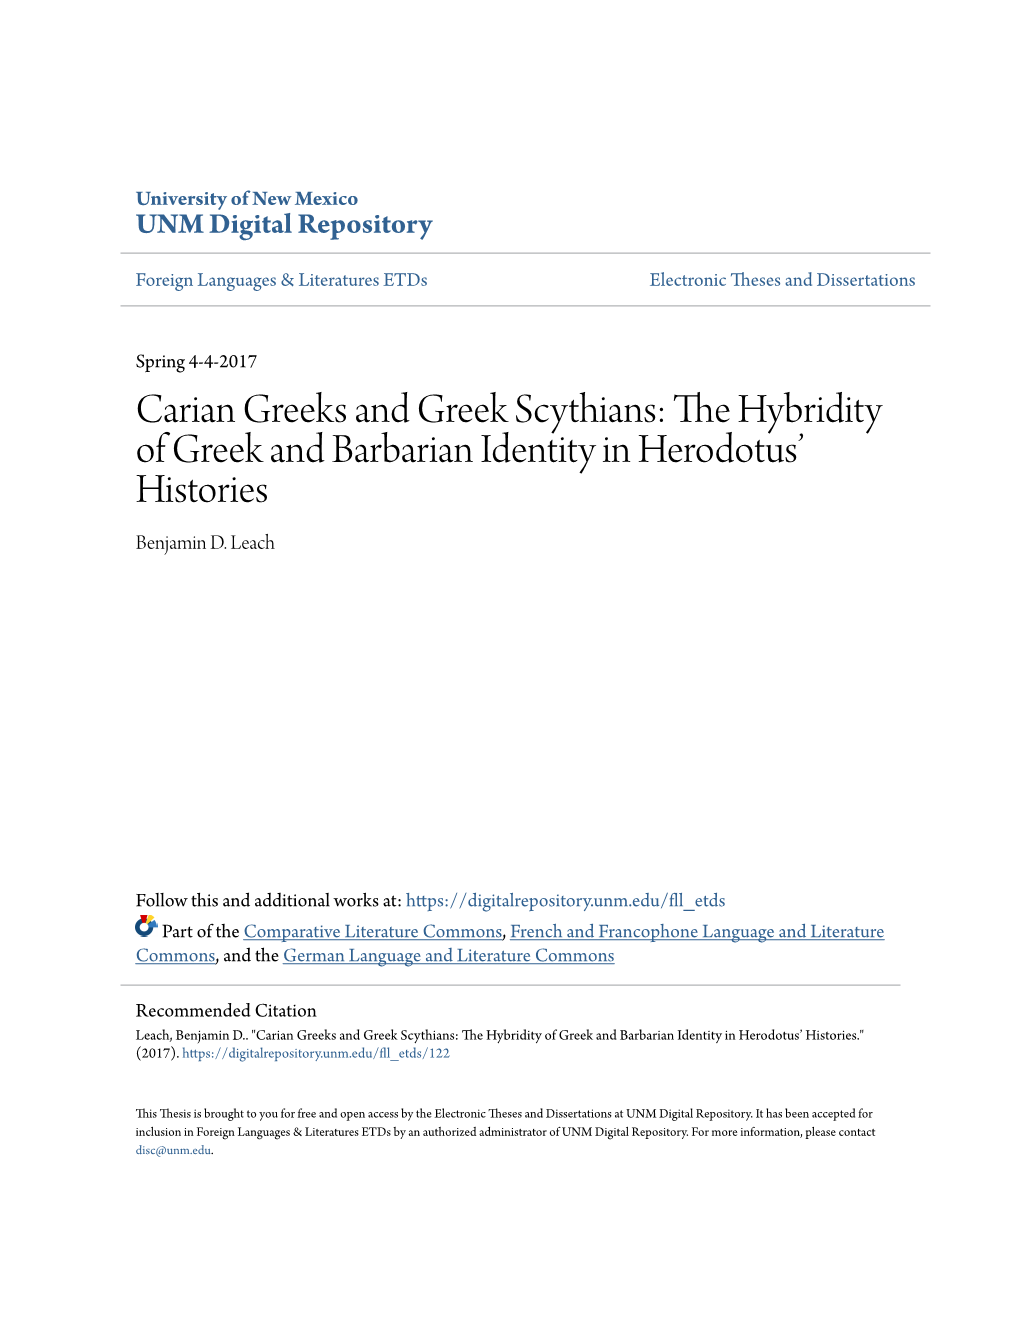 Carian Greeks and Greek Scythians: the Hybridity of Greek and Barbarian Identity in Herodotus' Histories